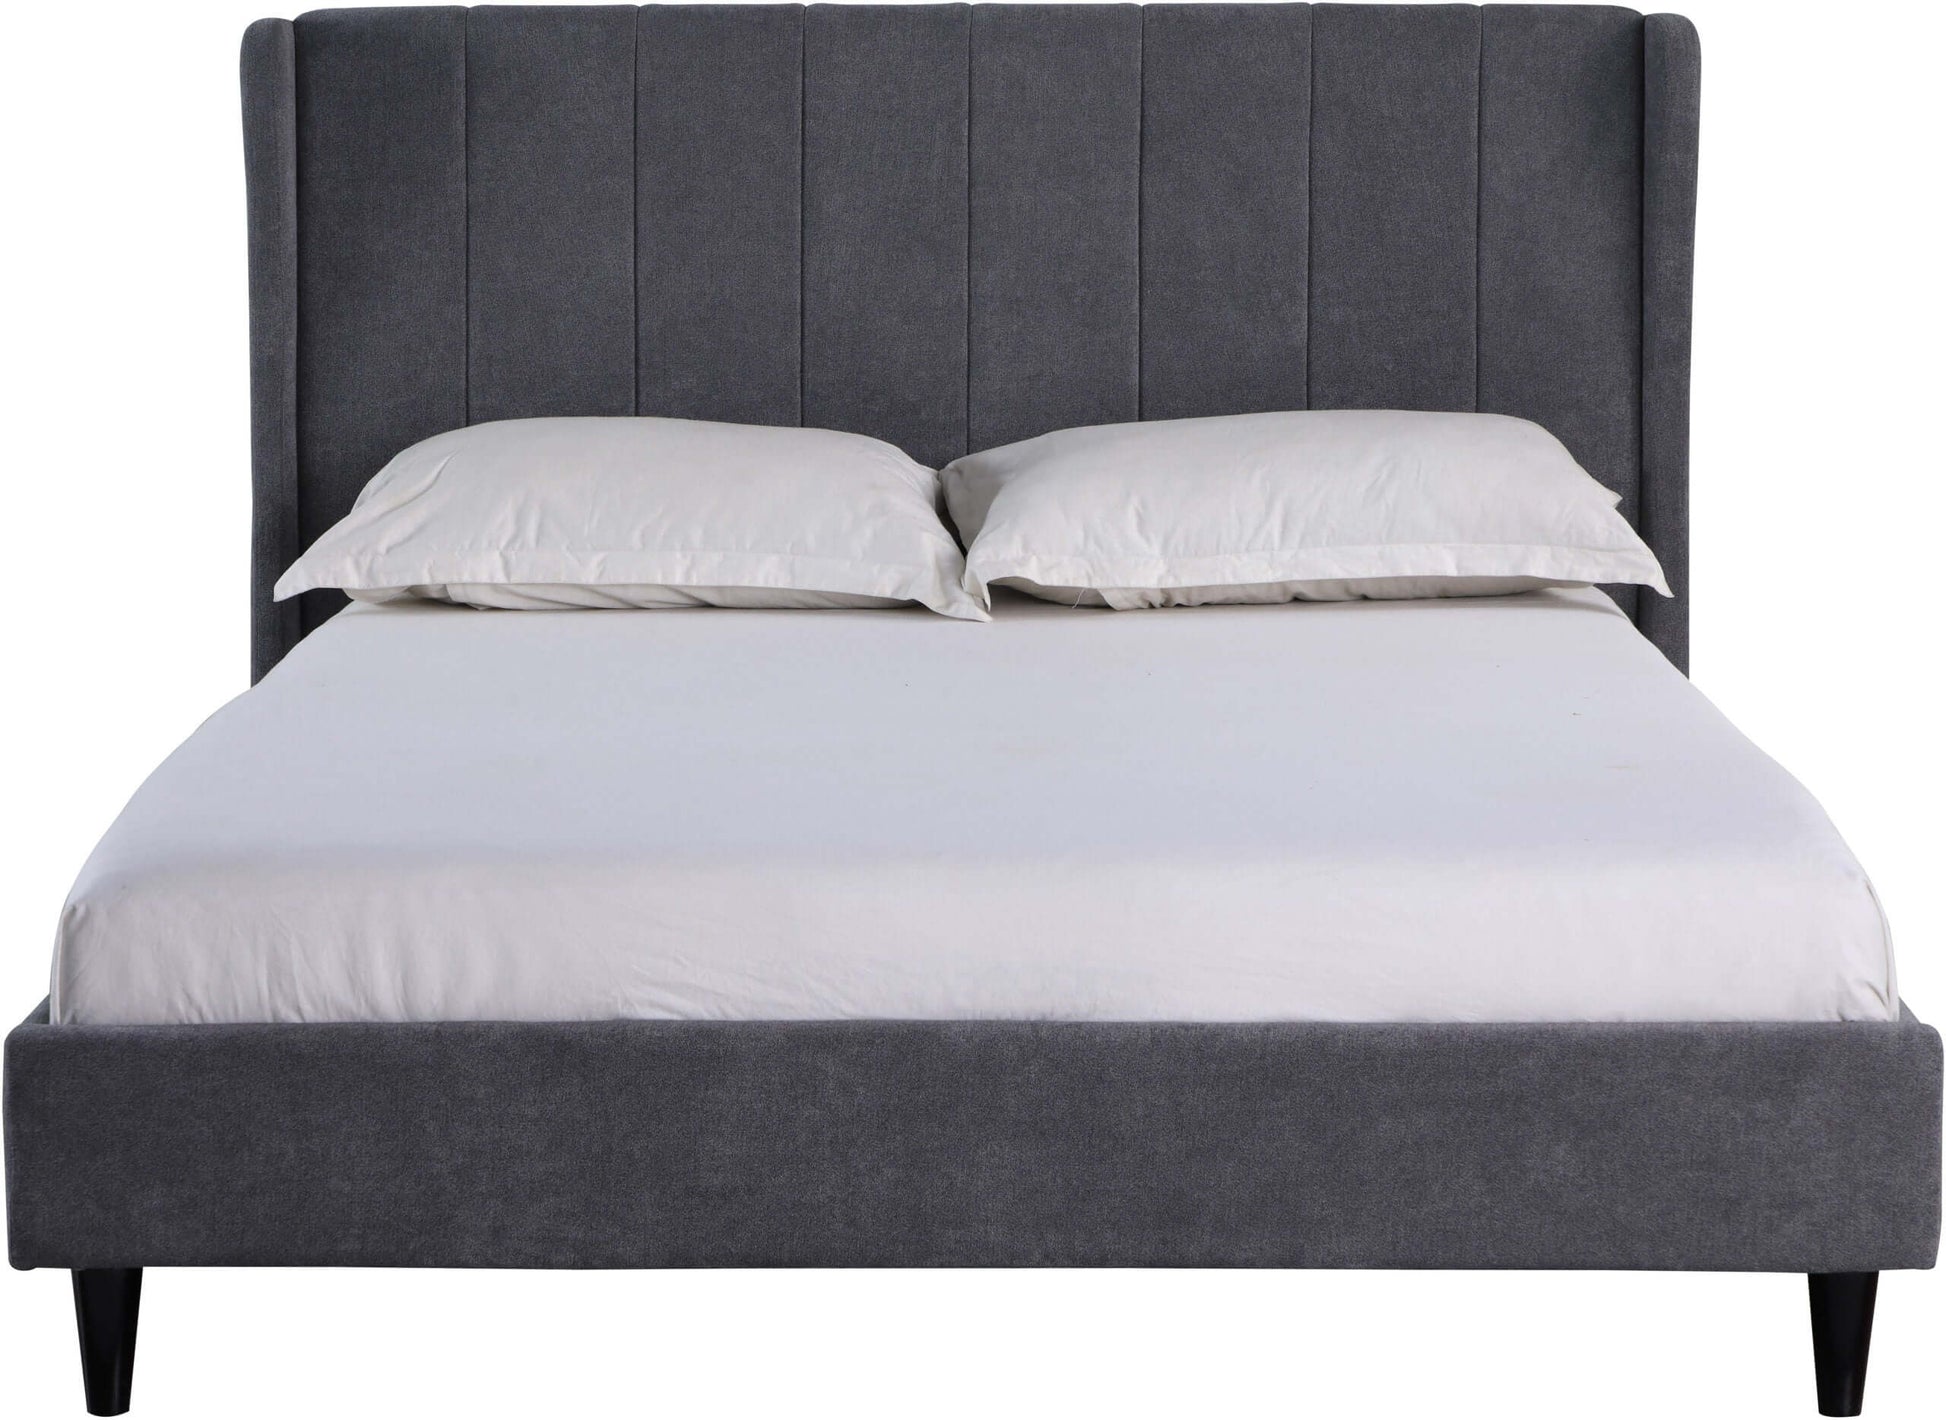 Amelia 5' King Bed Dark Grey Fabric- The Right Buy Store